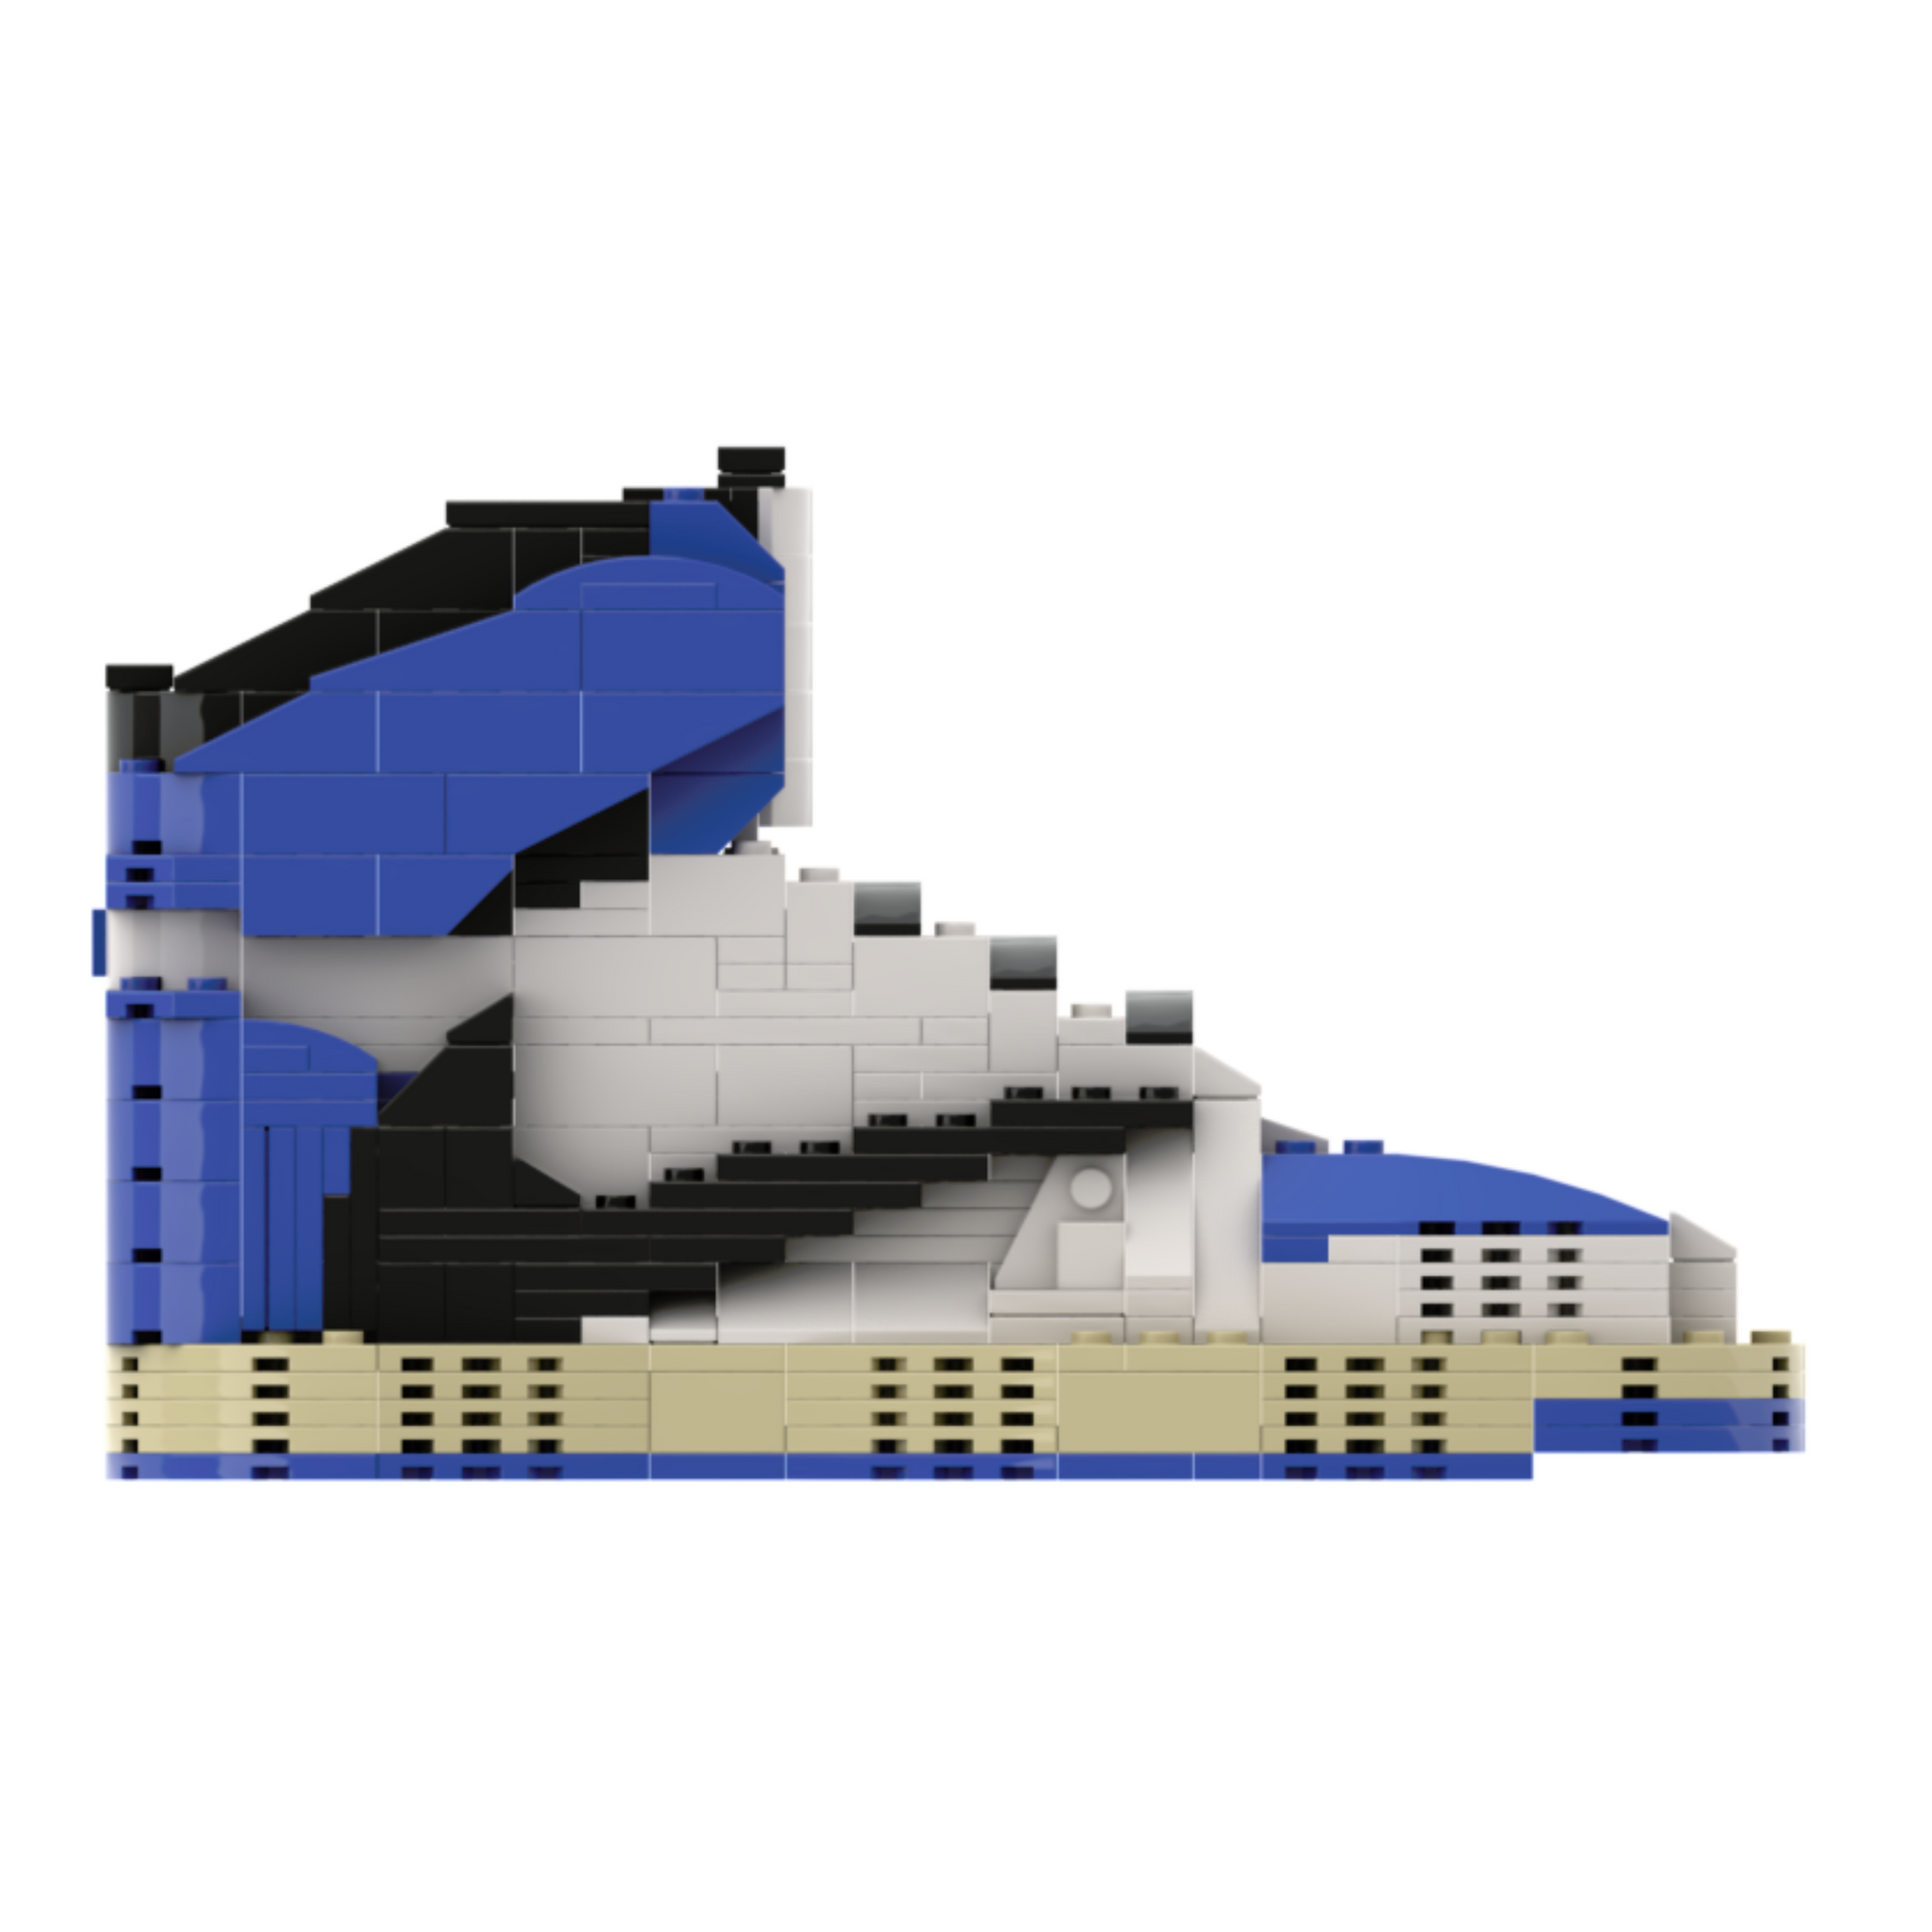 Kick Builds Sneaker Themed Gifts Gifts For Sneakerhead Adult Building Set Sneaker lover gifts Birthday Gift Ideas Sneakerhead Room Decor Sneaker Building Block Sets Cool Gifts Room Decor